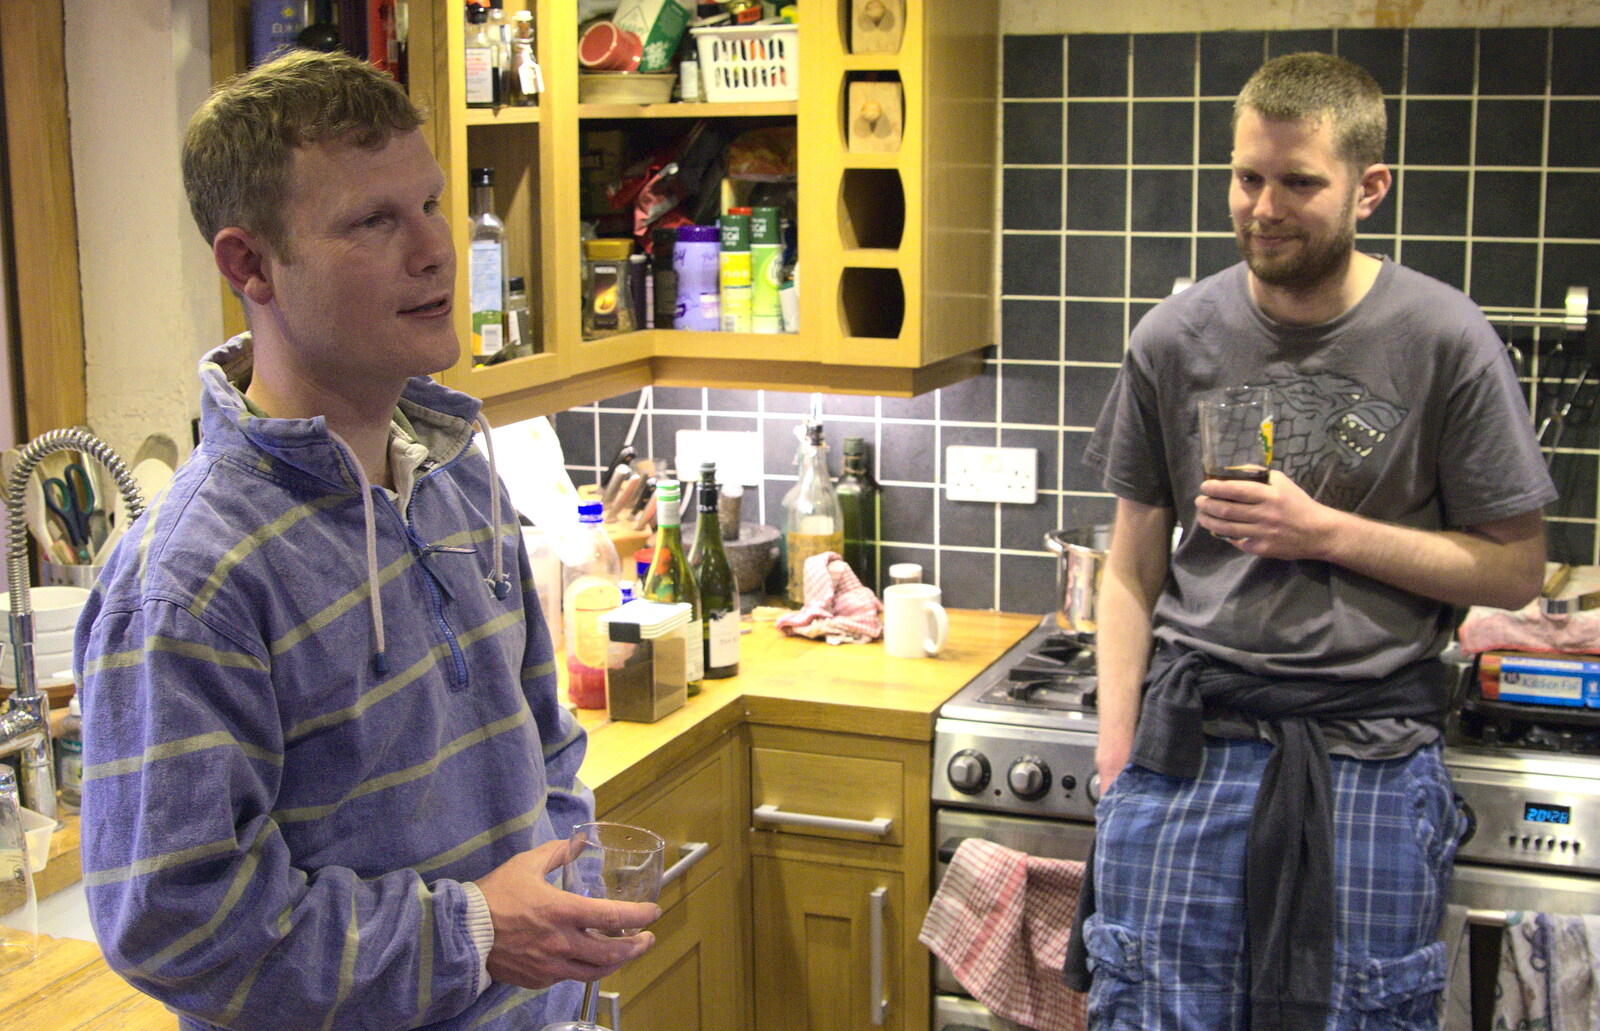 Mikey and The Boy Phil in the kitchen from A "Not a Birthday Party" Barbeque, Brome, Suffolk - 25th May 2014